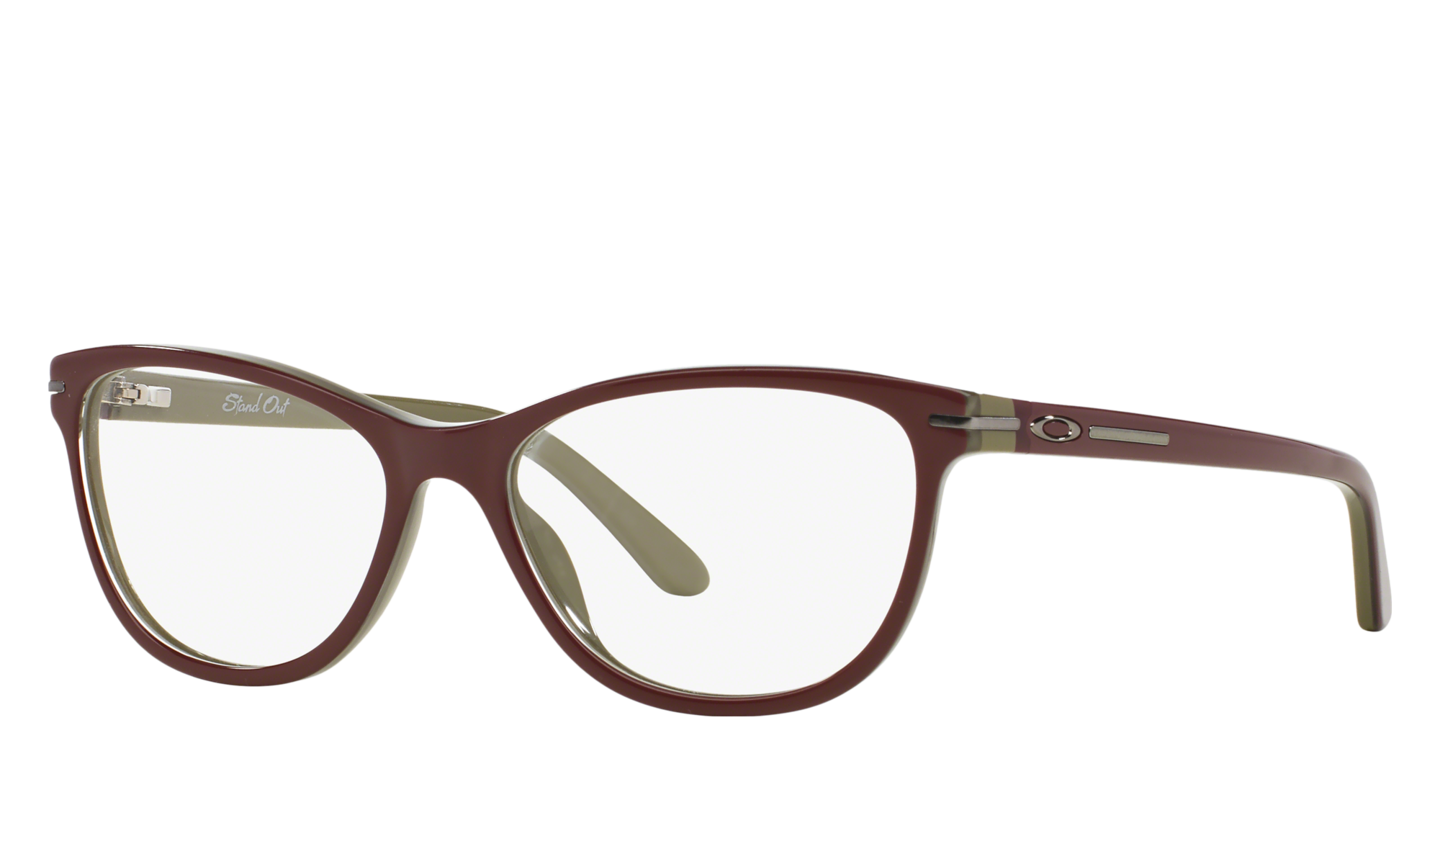 Oakley OX1112 STAND OUT Mahogany